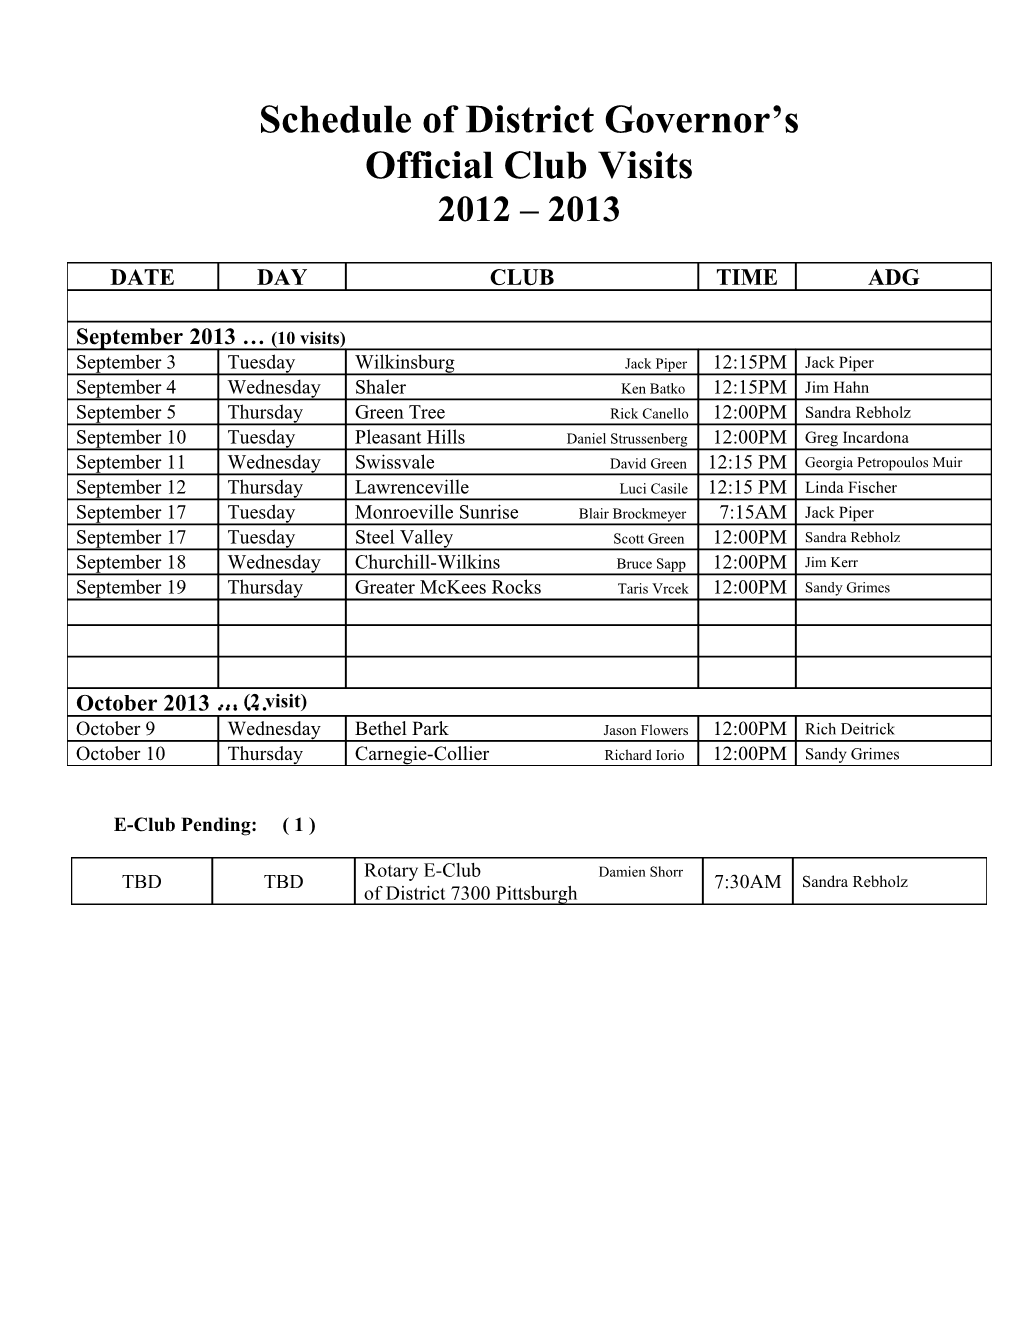 Schedule of Official